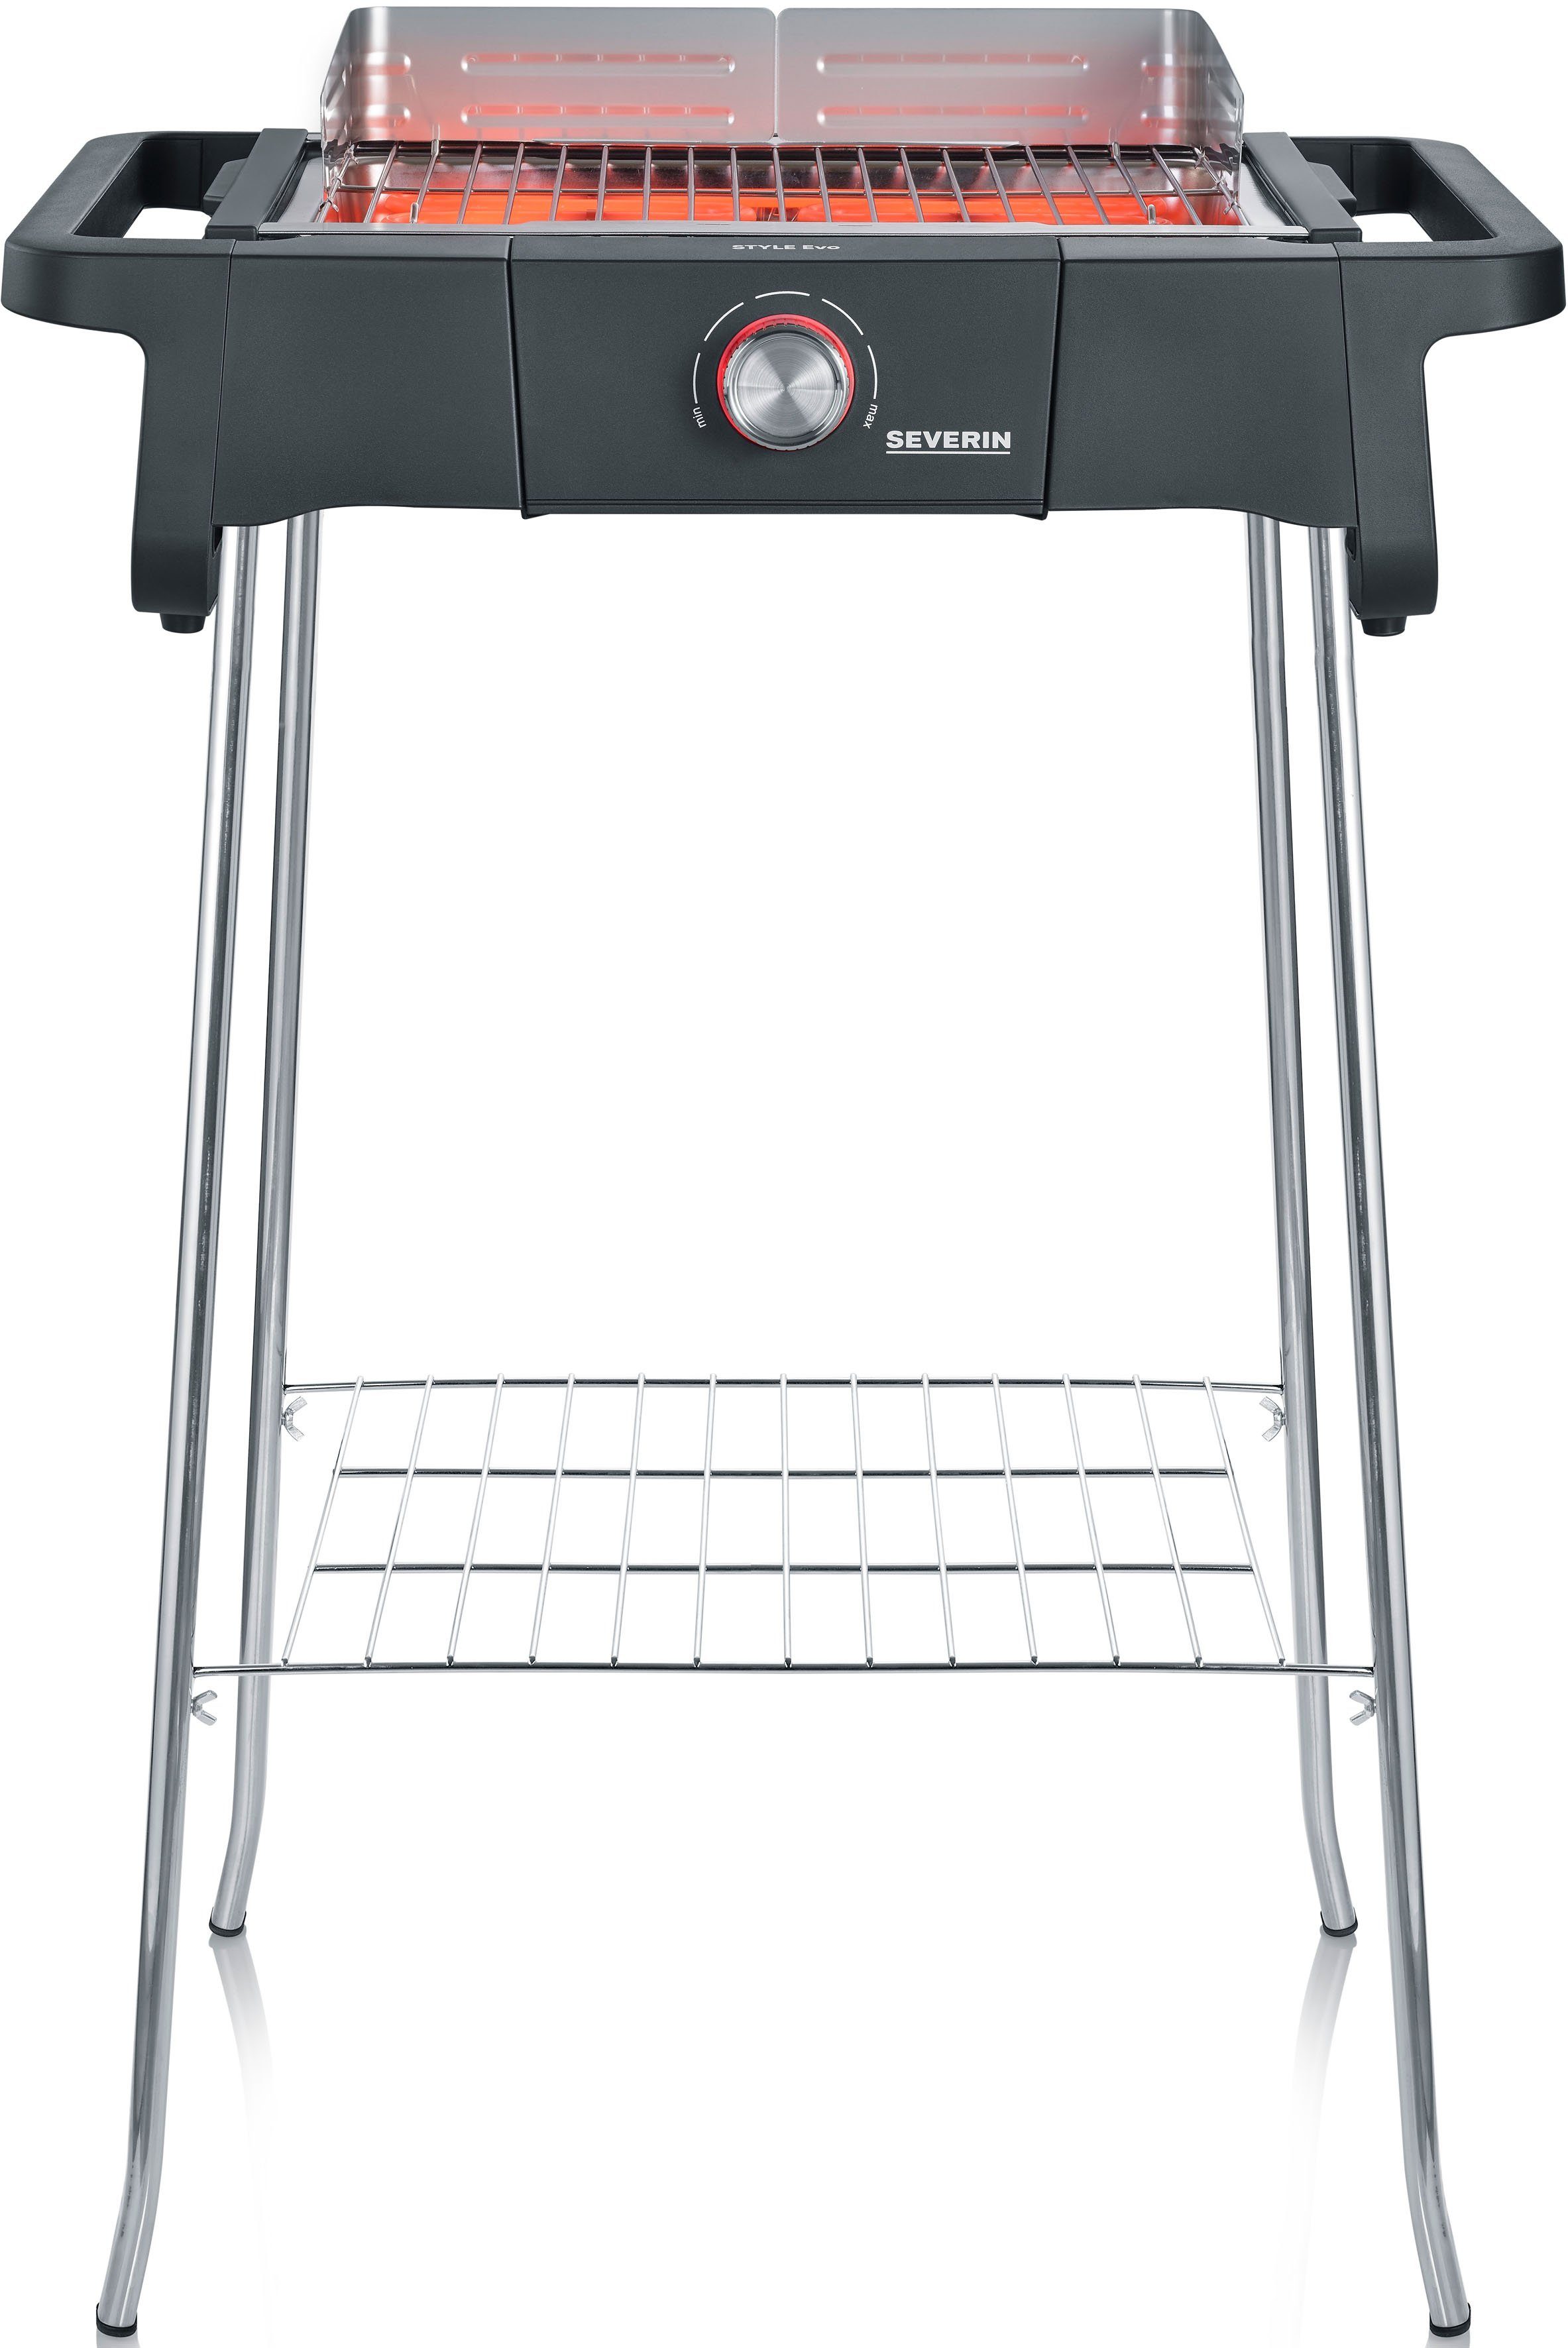 Severin Standgrill PG 8124 STYLE 2500 S, EVO W